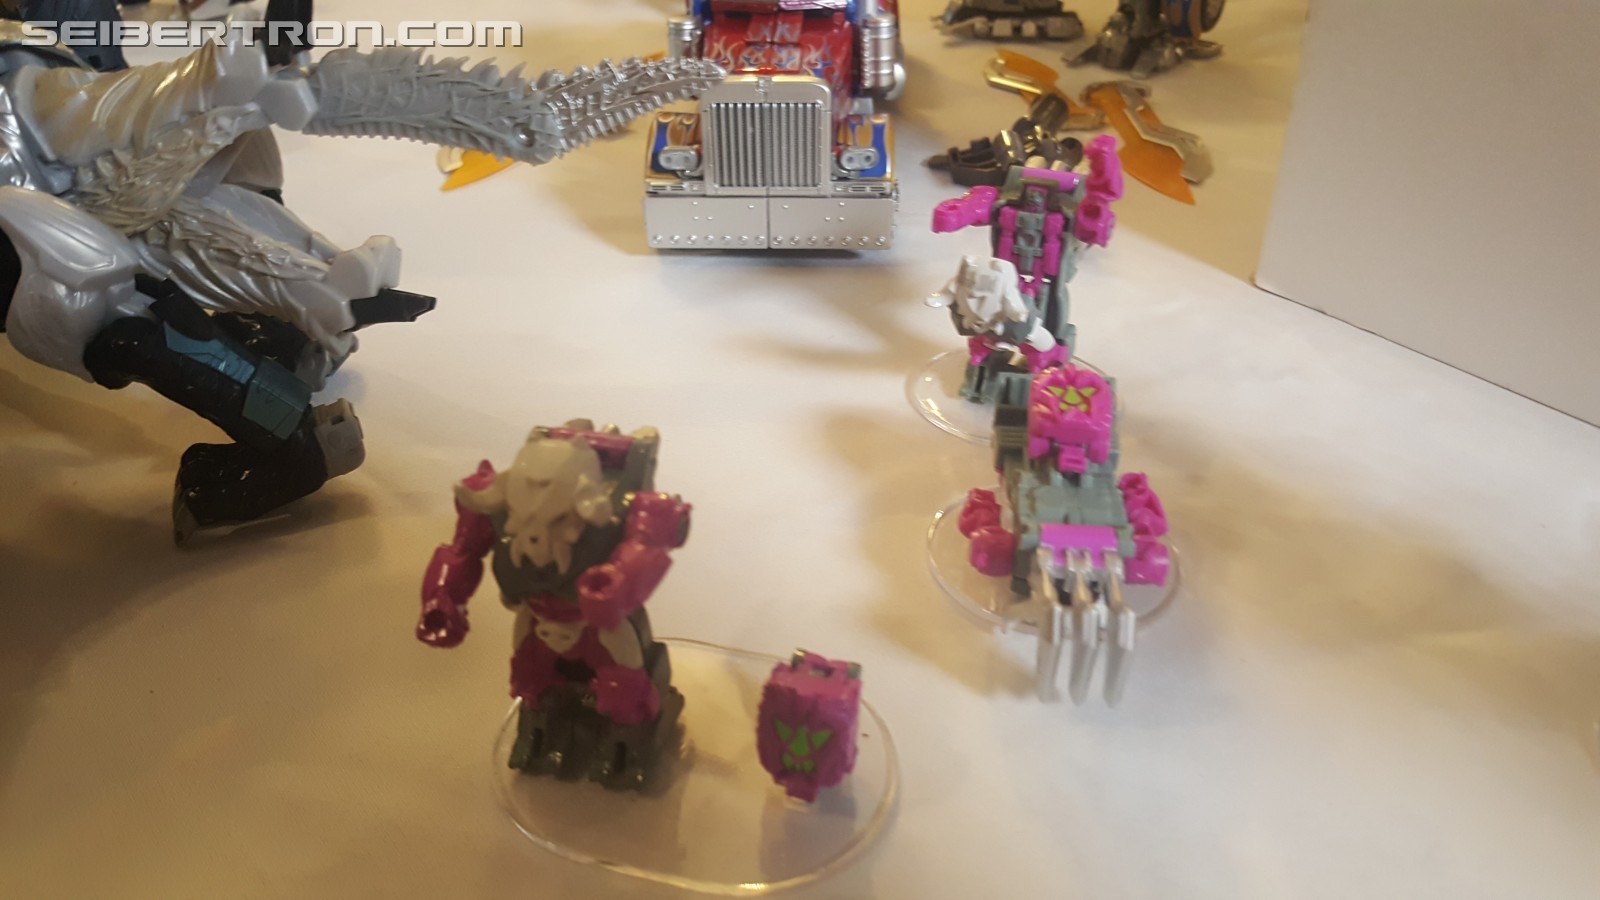 Transformers News: SDCC 2017: Hasbro Transformers Power of the Primes Toy Teaser Images, Featuring Jazz, Skullgrin